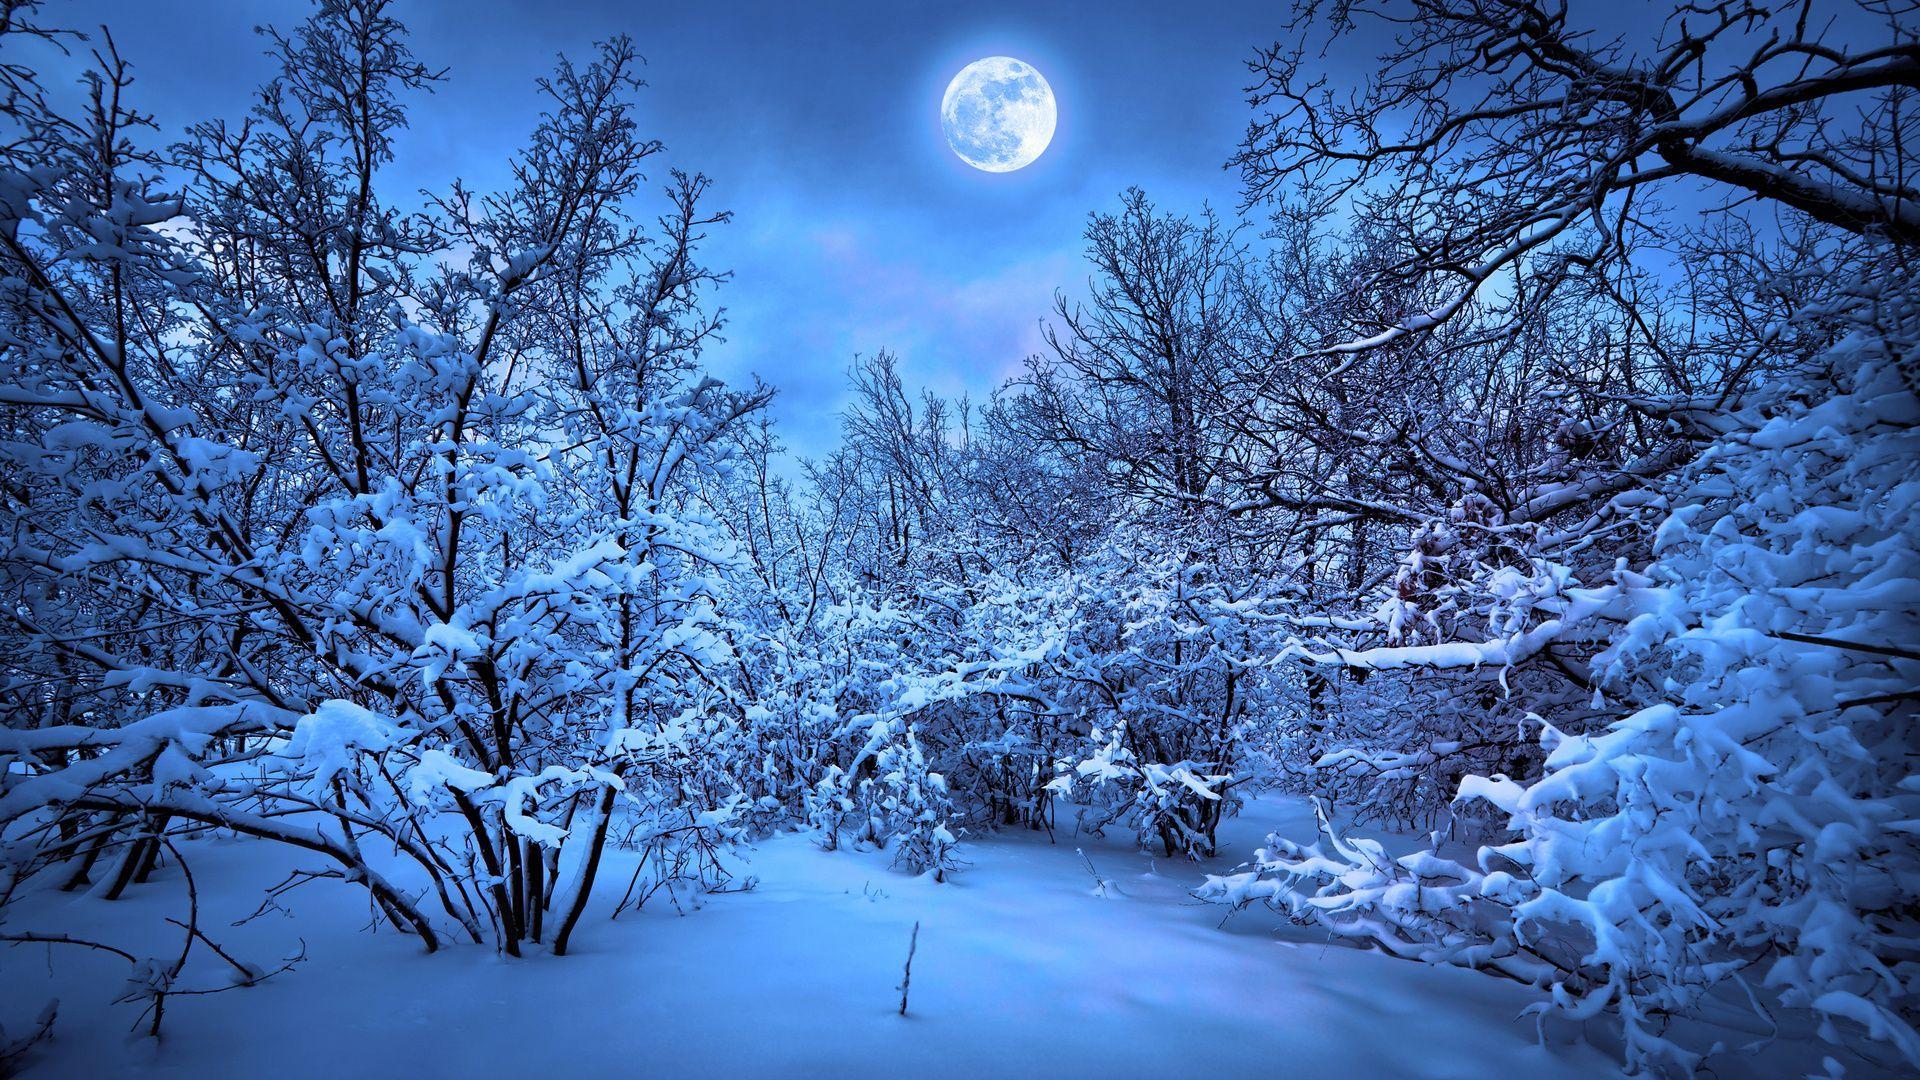 Here is Snowy Night Forest Wallpaper with ID 3288 on Forest, Winter